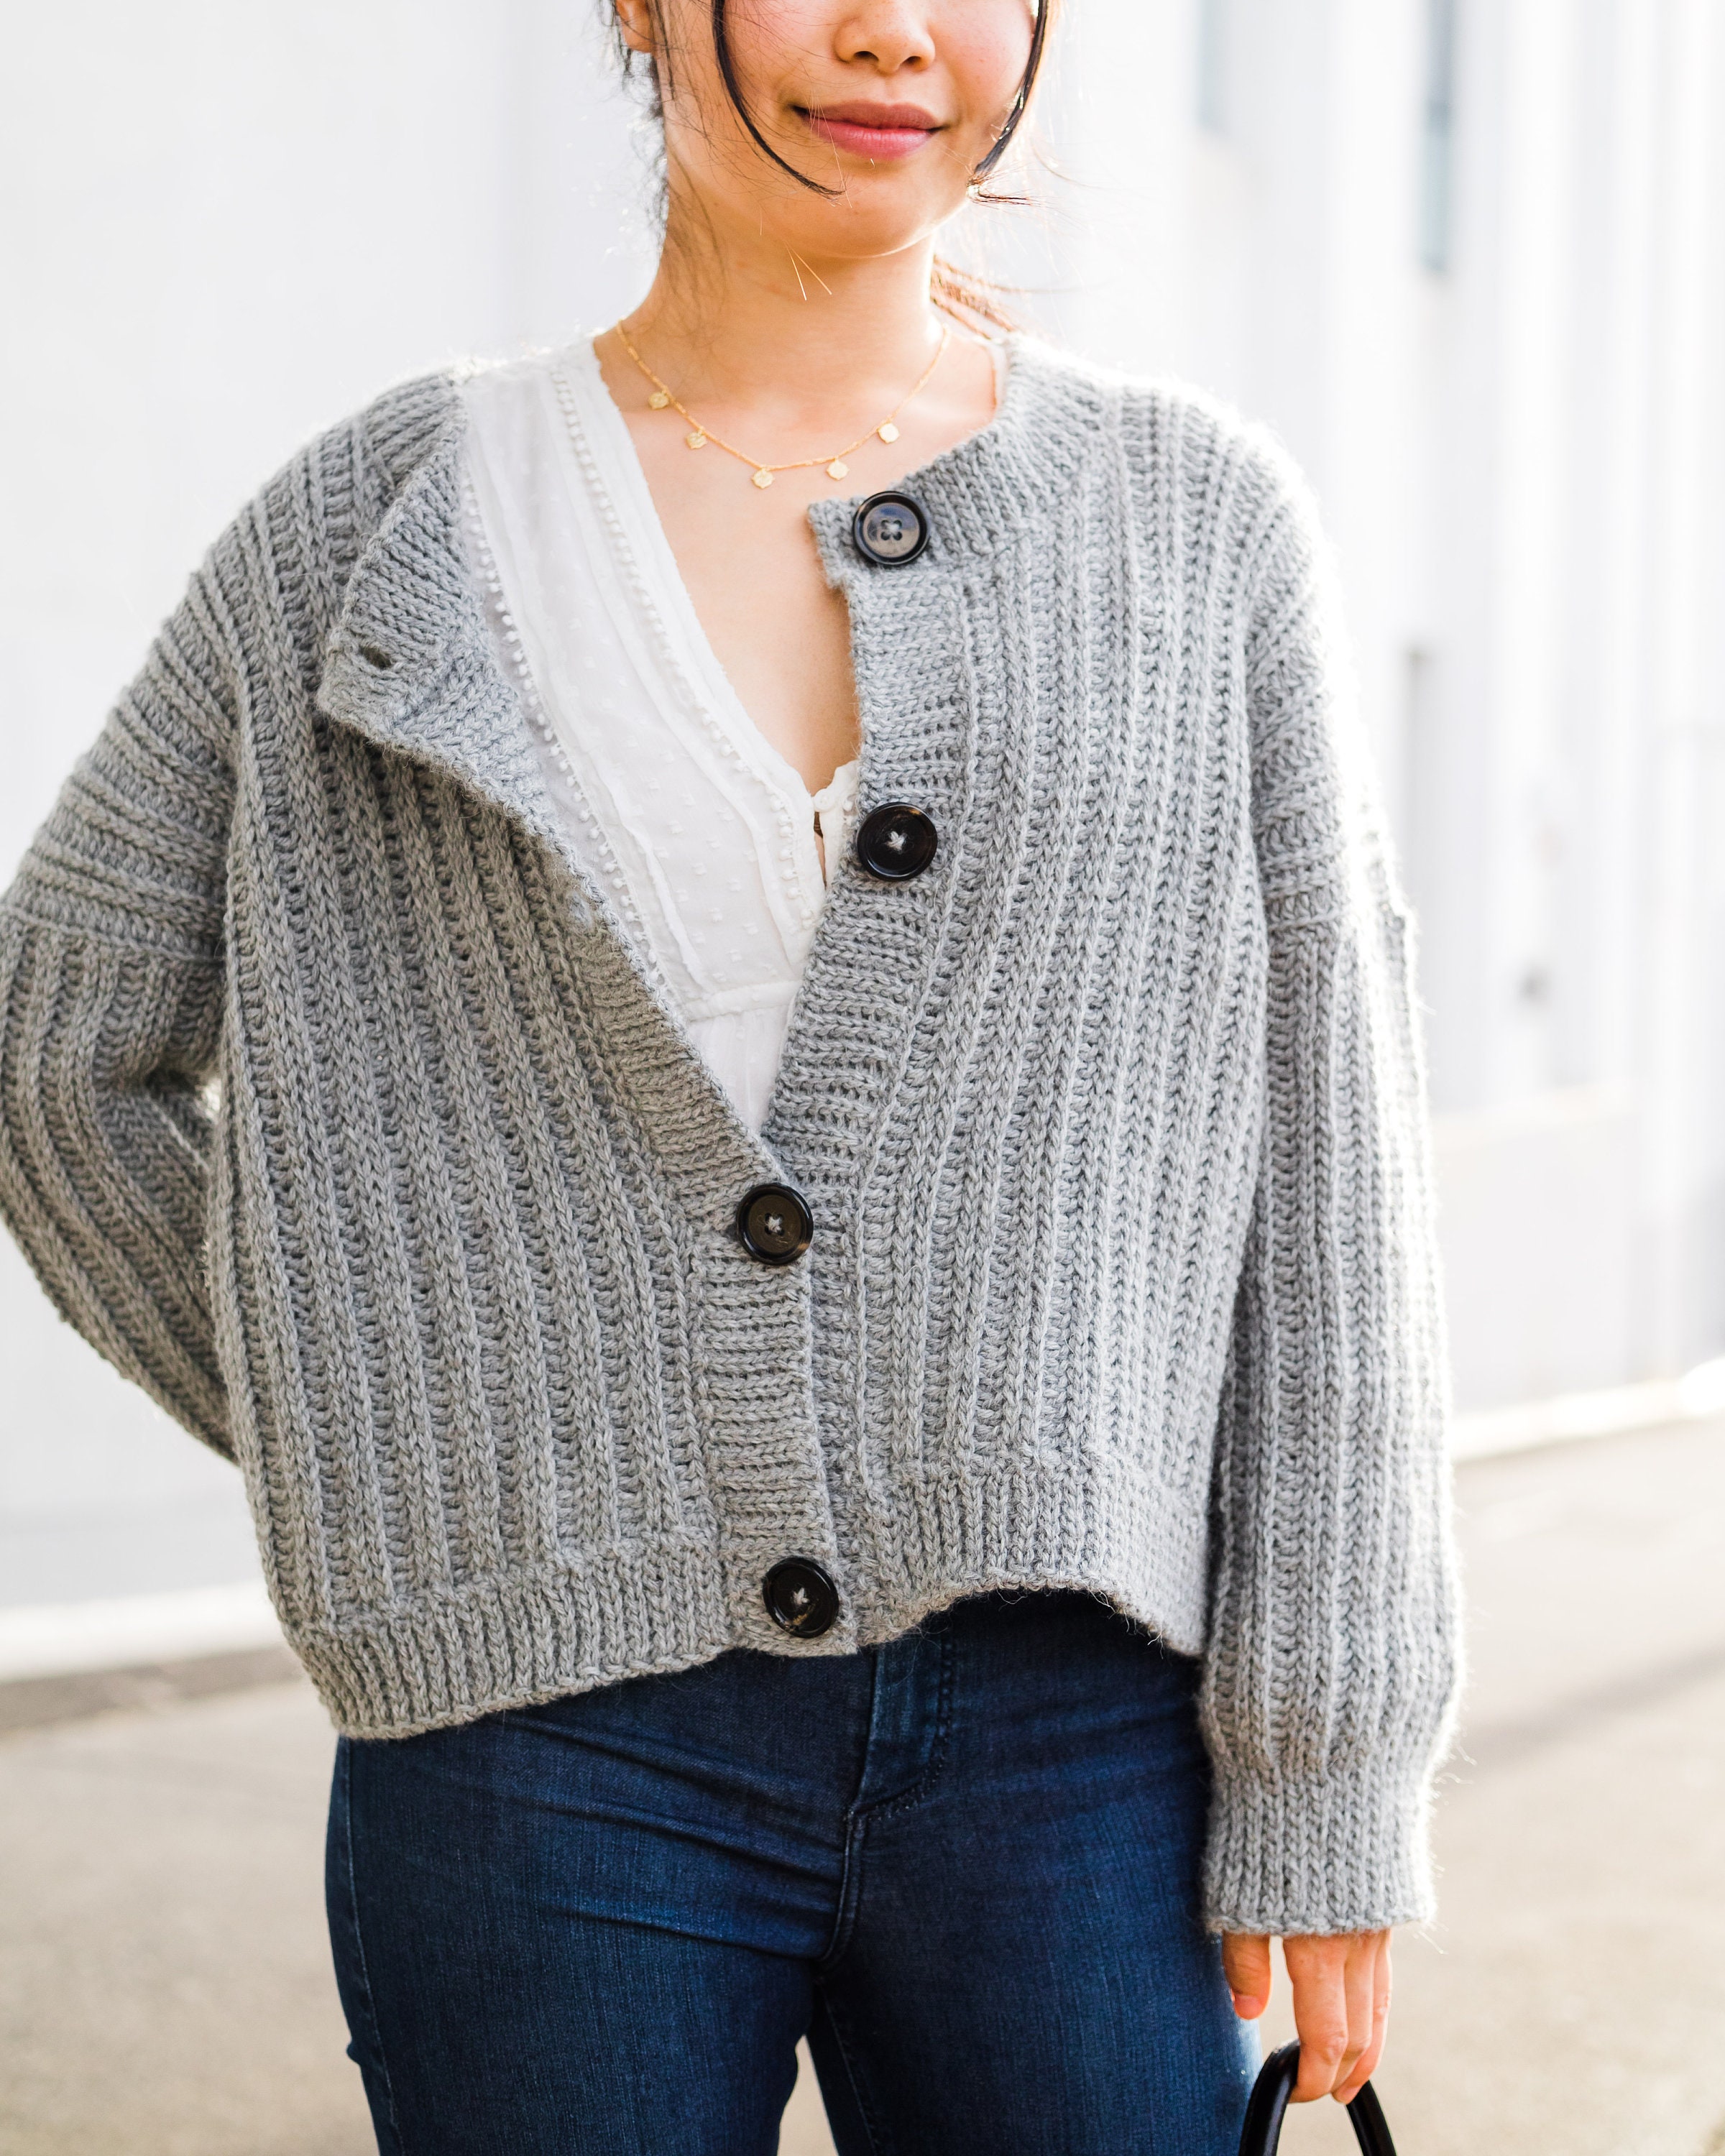 Crochet Ribbed Button Cardigan // Slouchy Oversized Sweater // Pompeii  Cardigan Crochet Pattern Pdf Instant Digital Download Forthefrills - Etsy